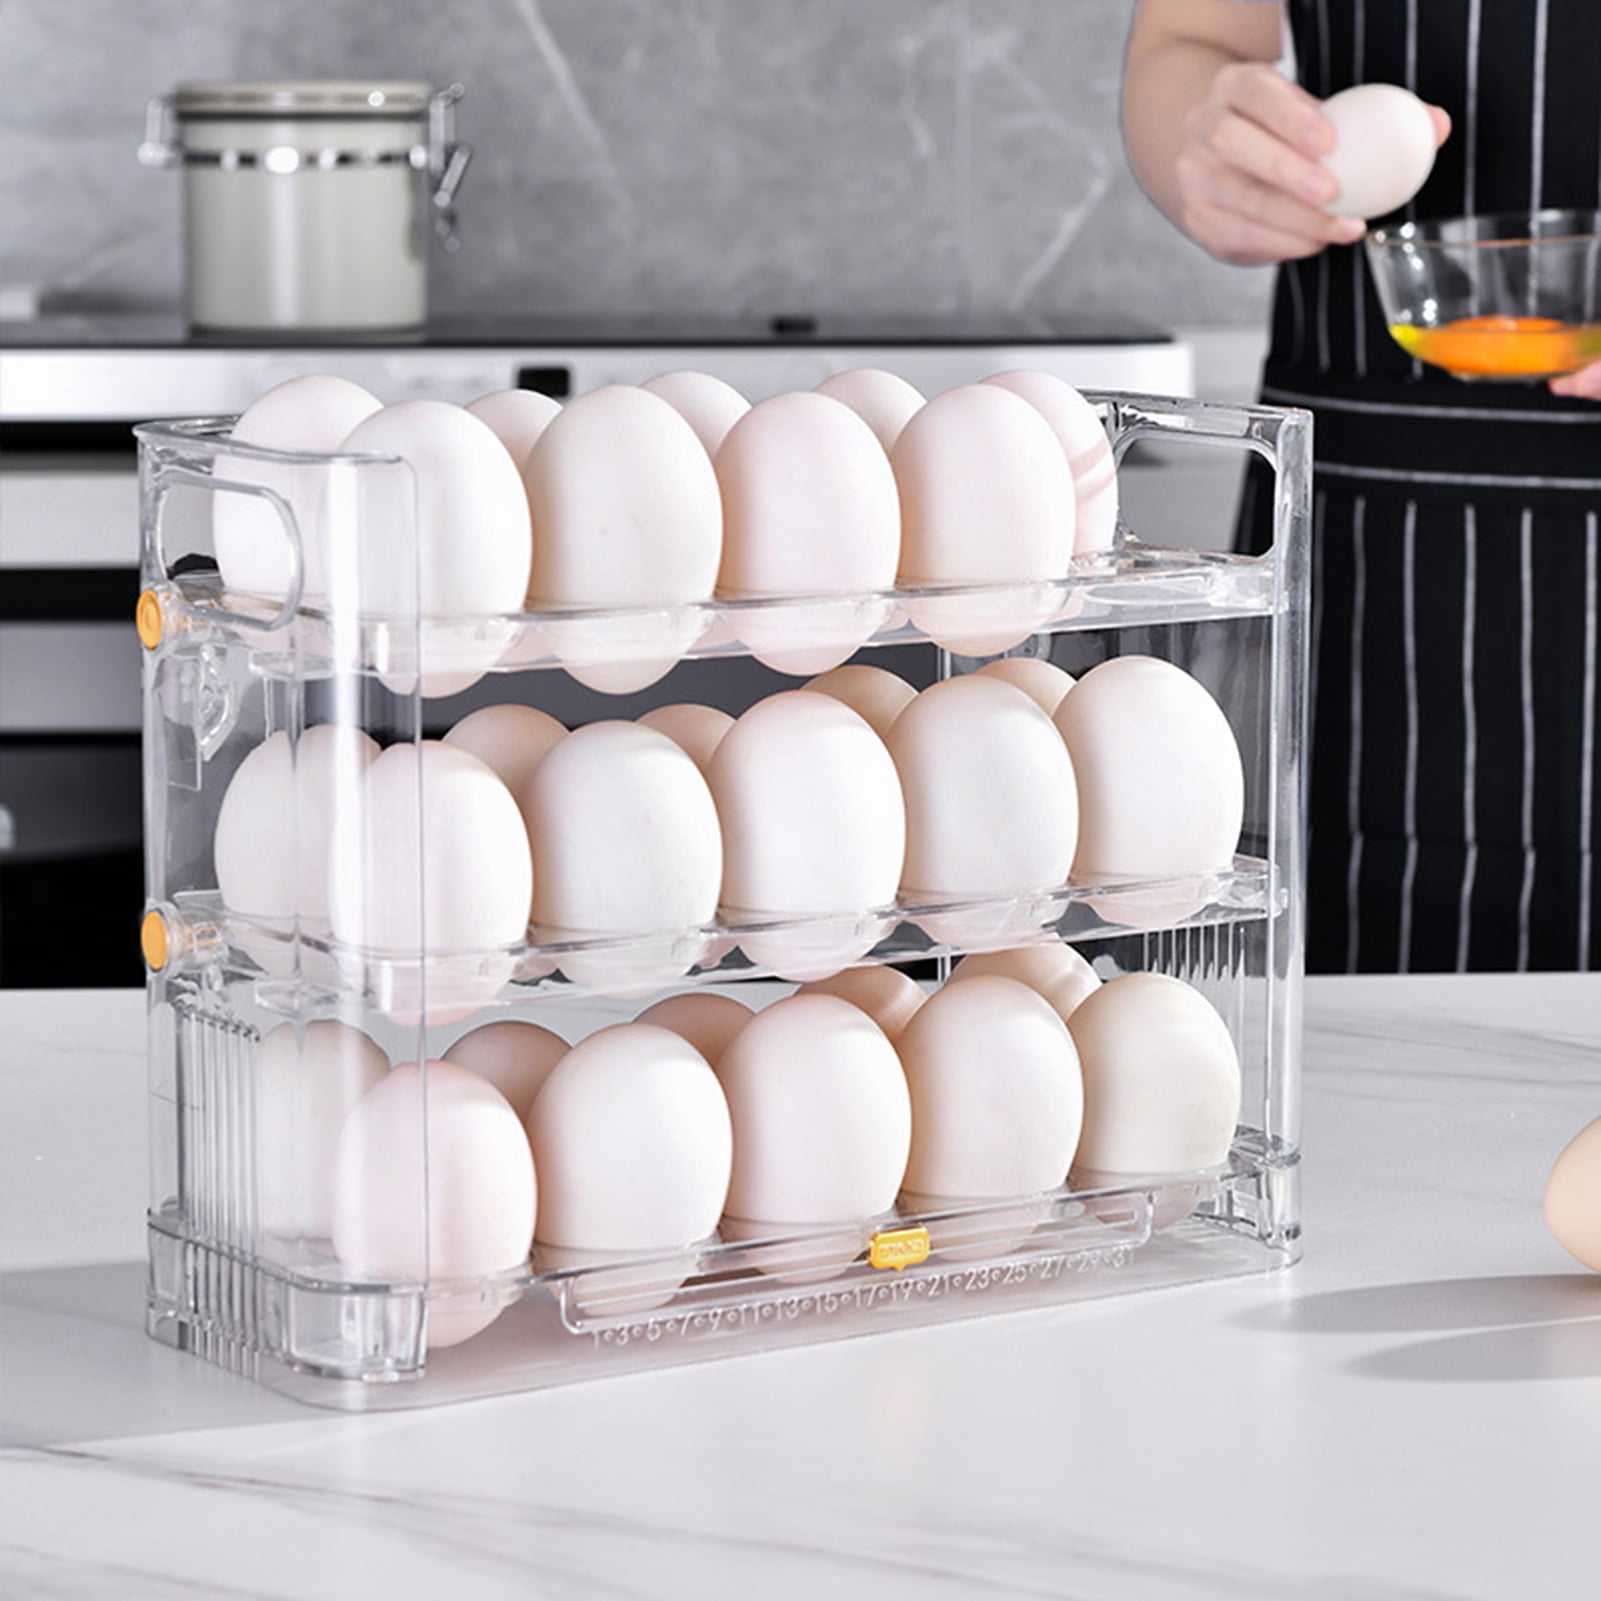 Deals！Loyerfyivos 30 Grid Egg Holder for Refrigerator, 3-Layer Egg Storage  Container, Plastic Chicken Egg Tray Egg Fresh Storage Box for Kitchen Fridge  and Table 